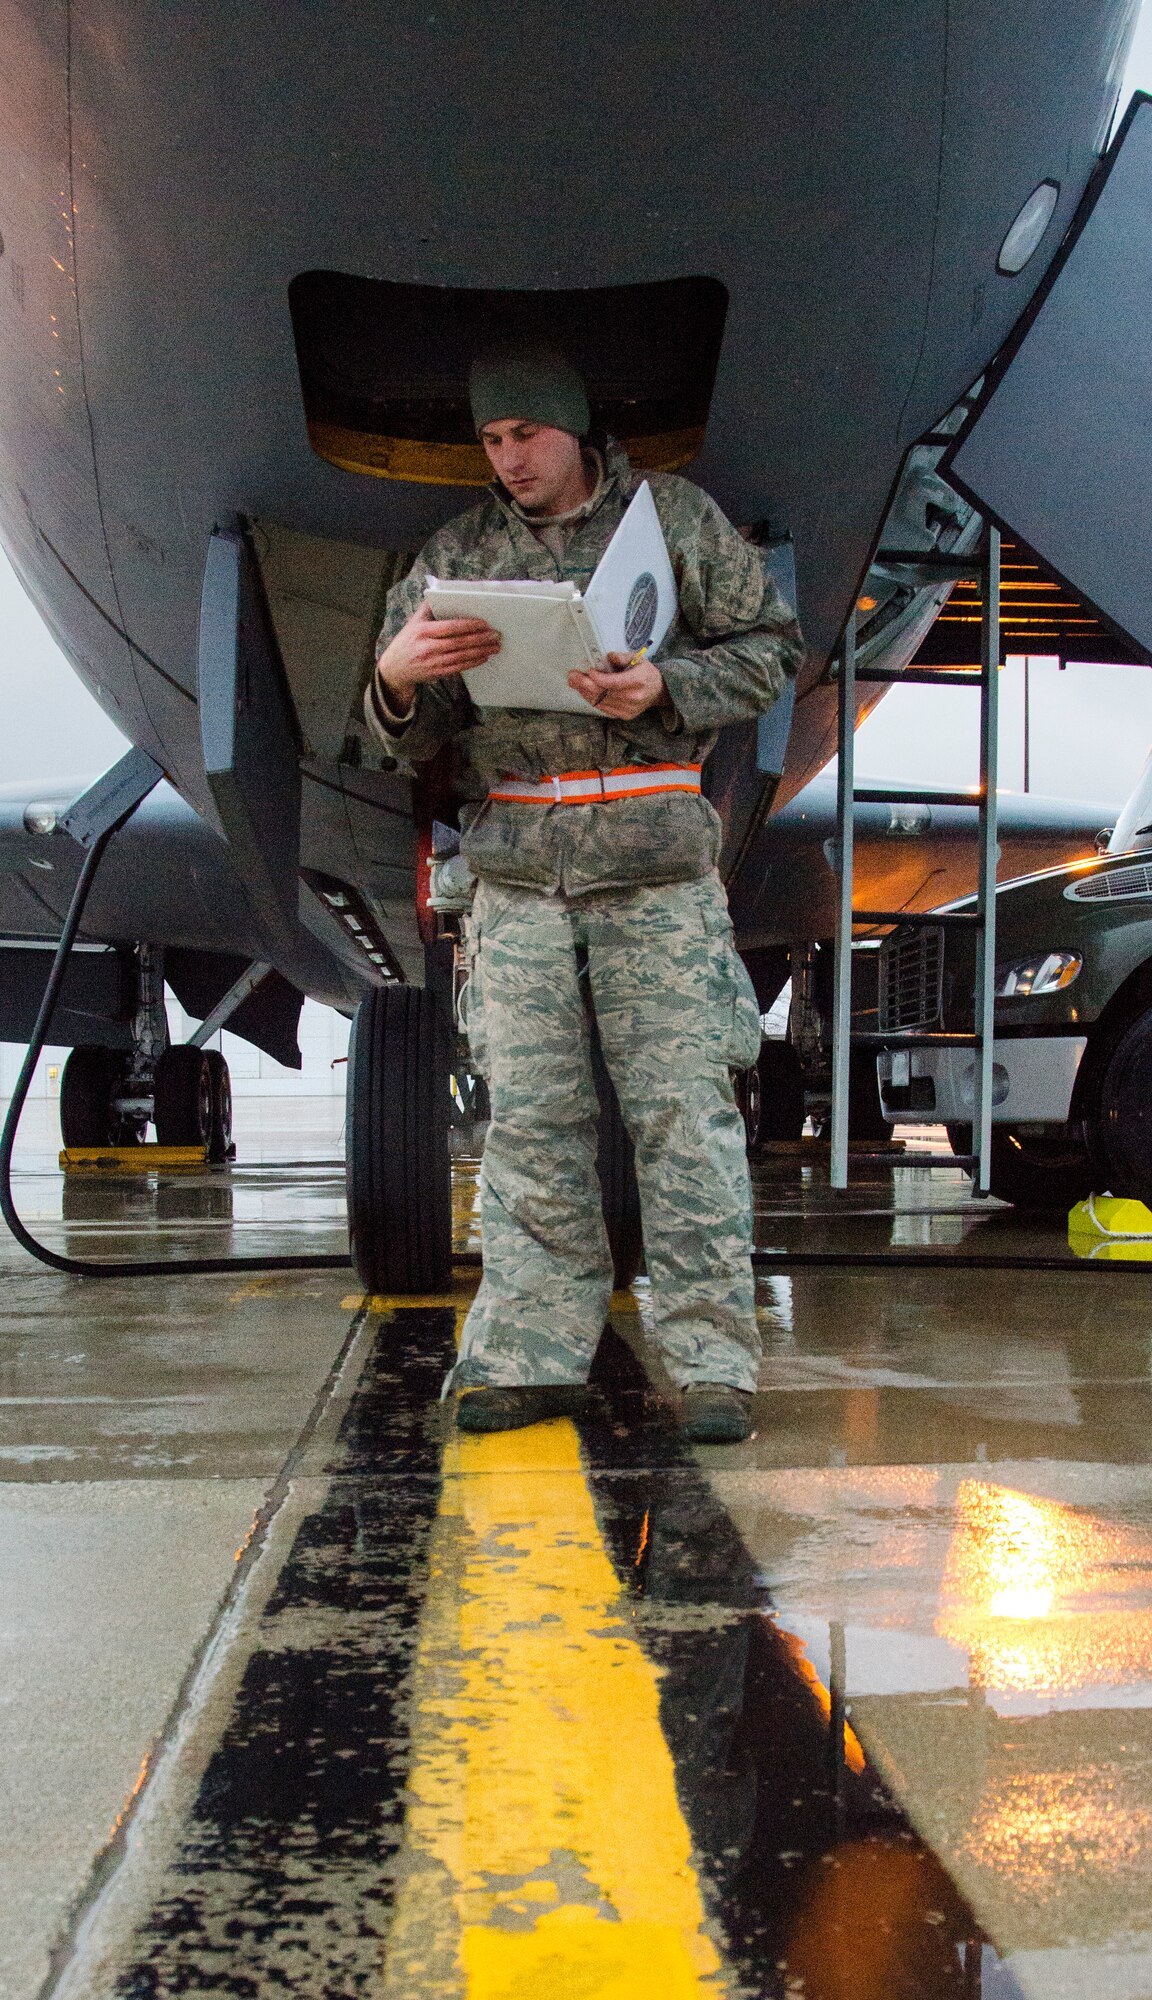 An Airmen reviews a pre-flight instruction binder during a generation exercise at the 128th Air Refueling Wing, Wisconsin Air National Guard, Nov. 4, 2017.